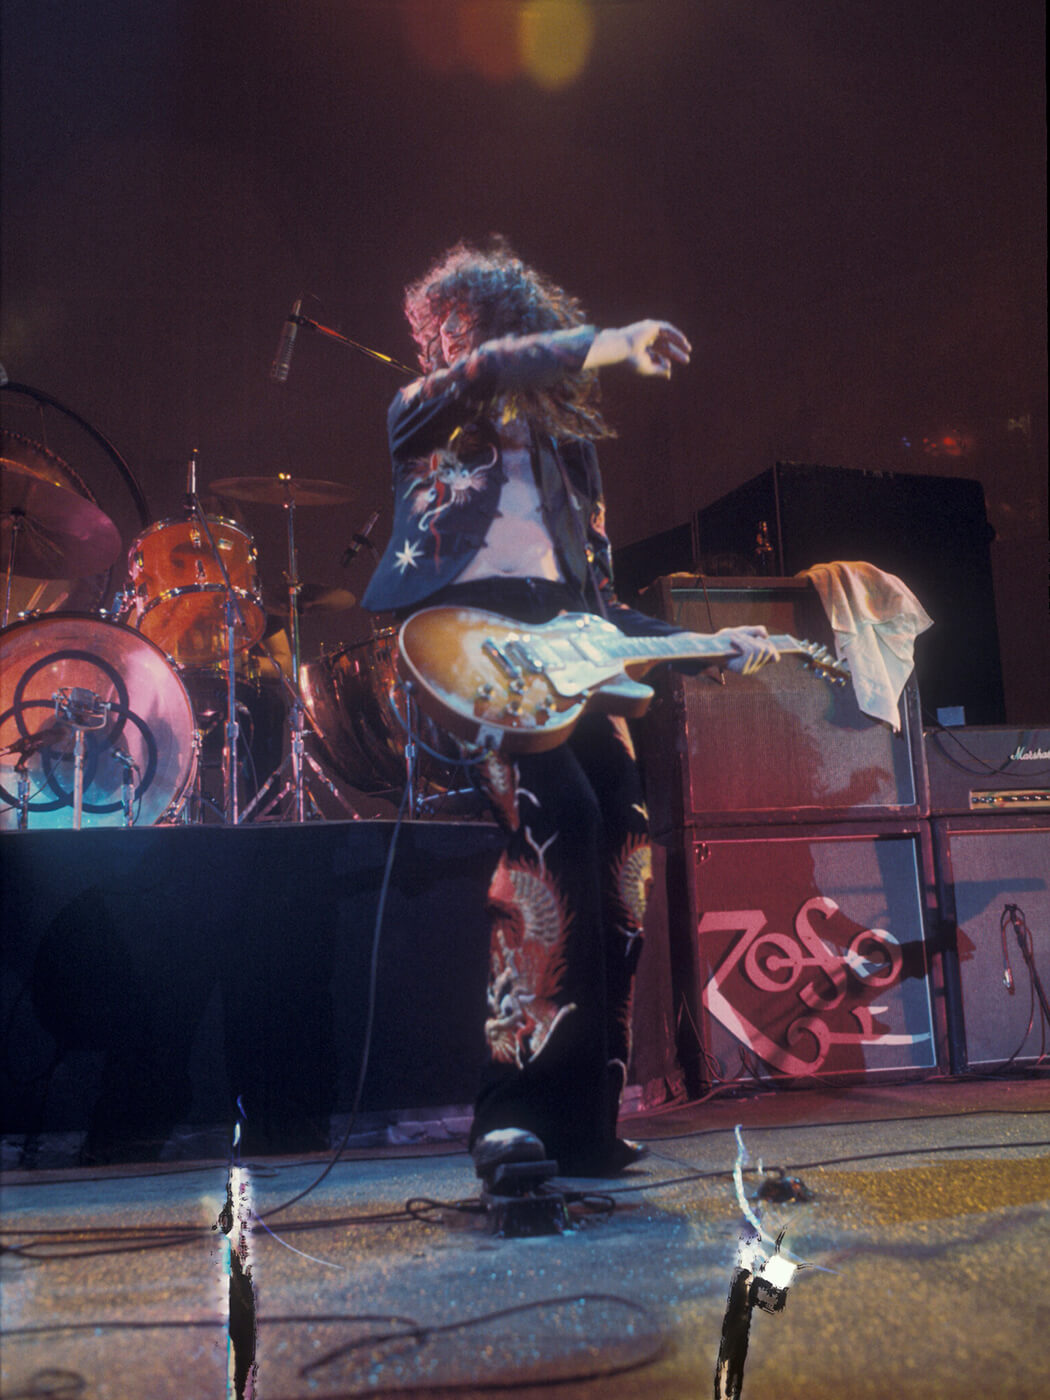 Jimmy Page performing in 1975 with a wah pedal, photo by Watal Asanuma/Shinko Music via Getty Images